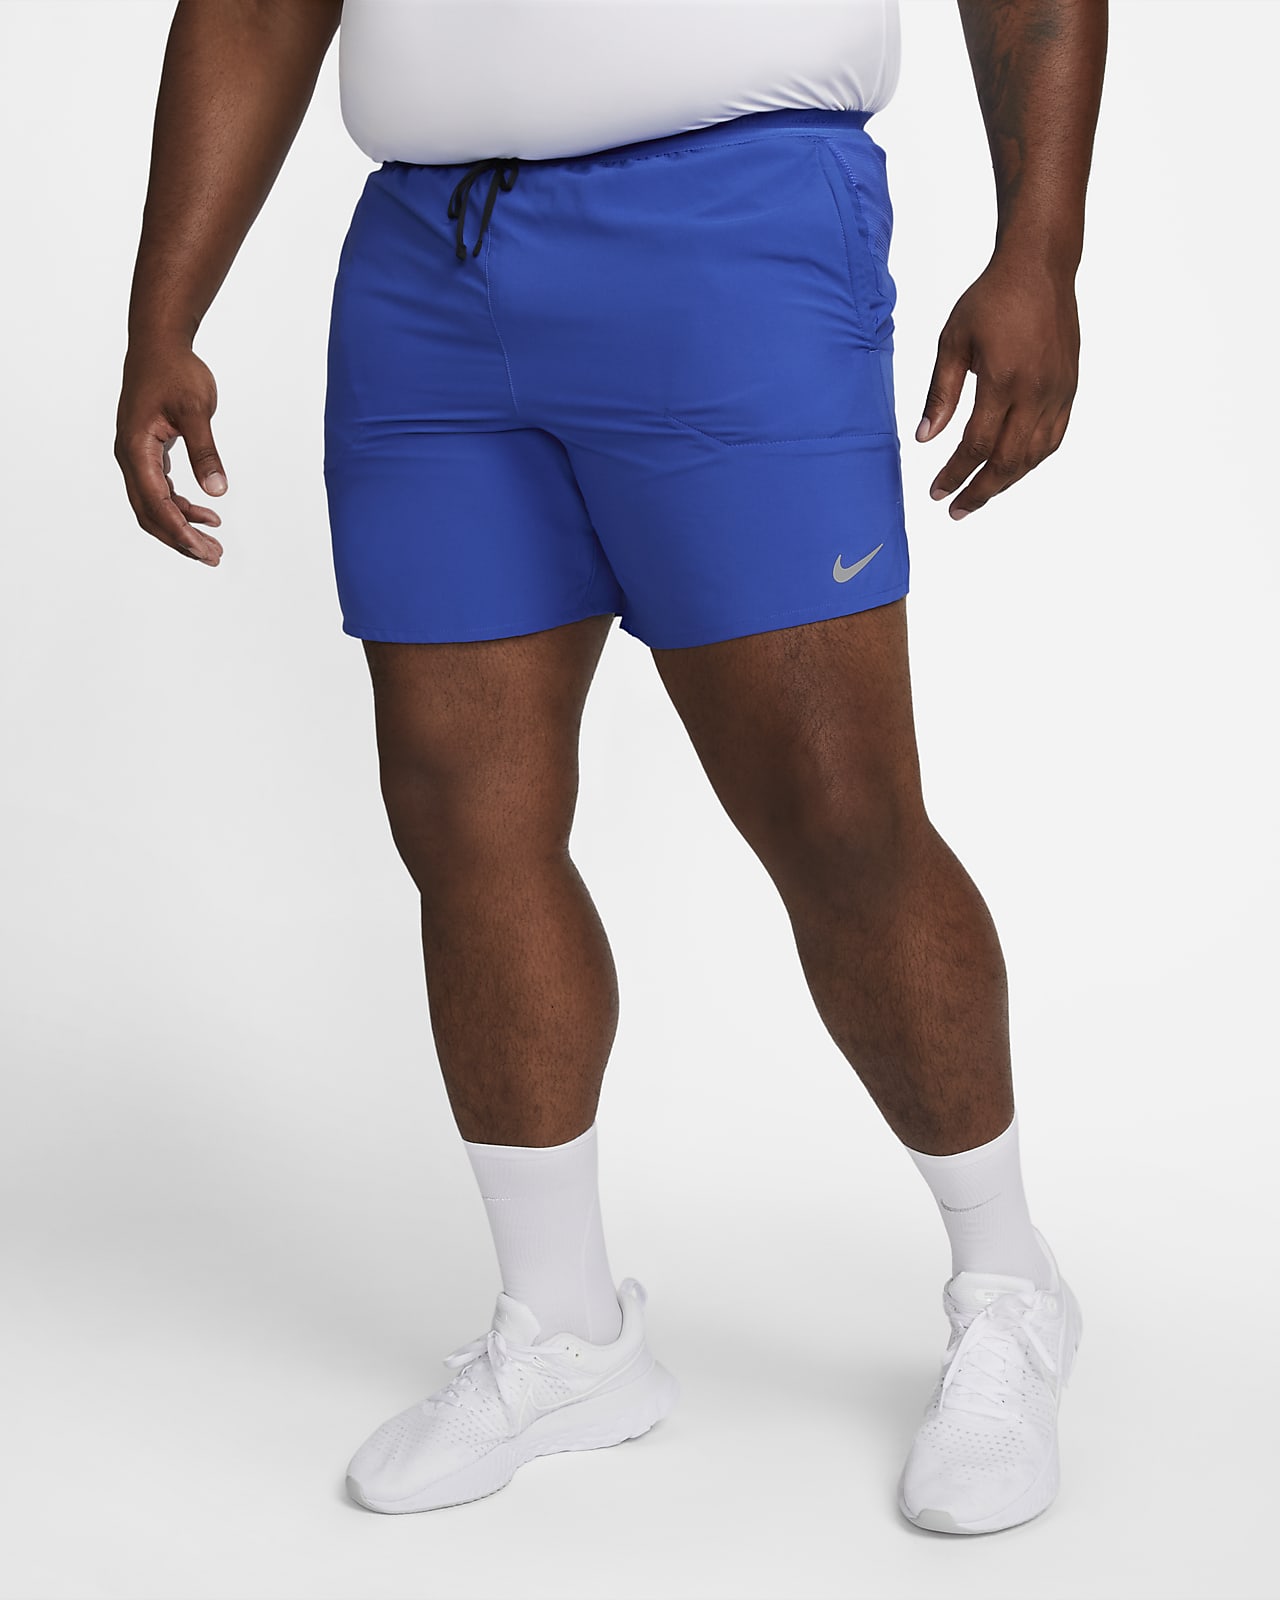 The Best Men's Training Shorts by Nike to Shop Now.